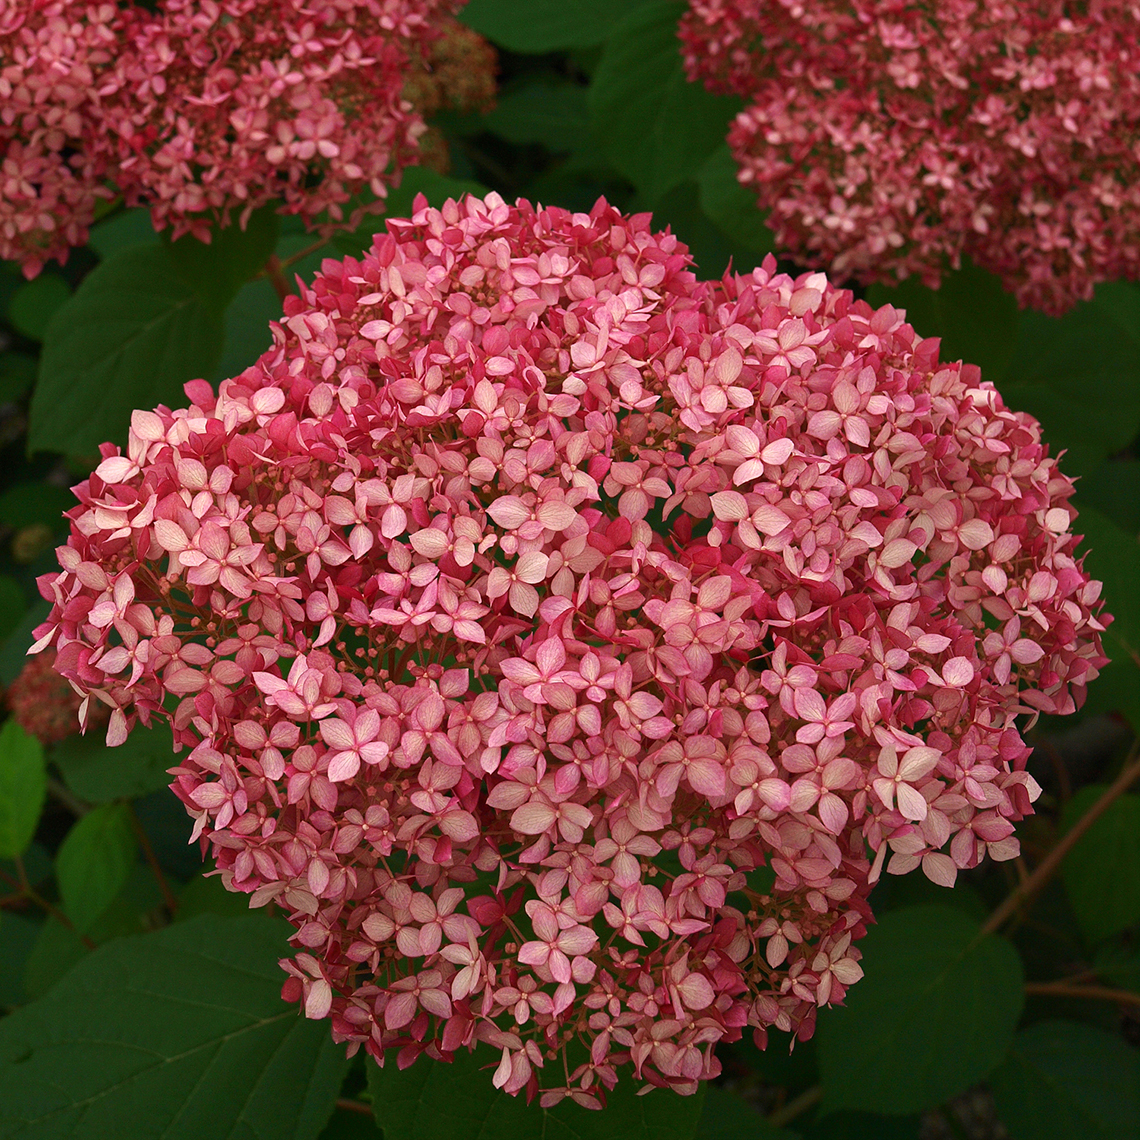 Closeup of three blooms of Invincibelle Spirit hydrangea showing their deep pink color